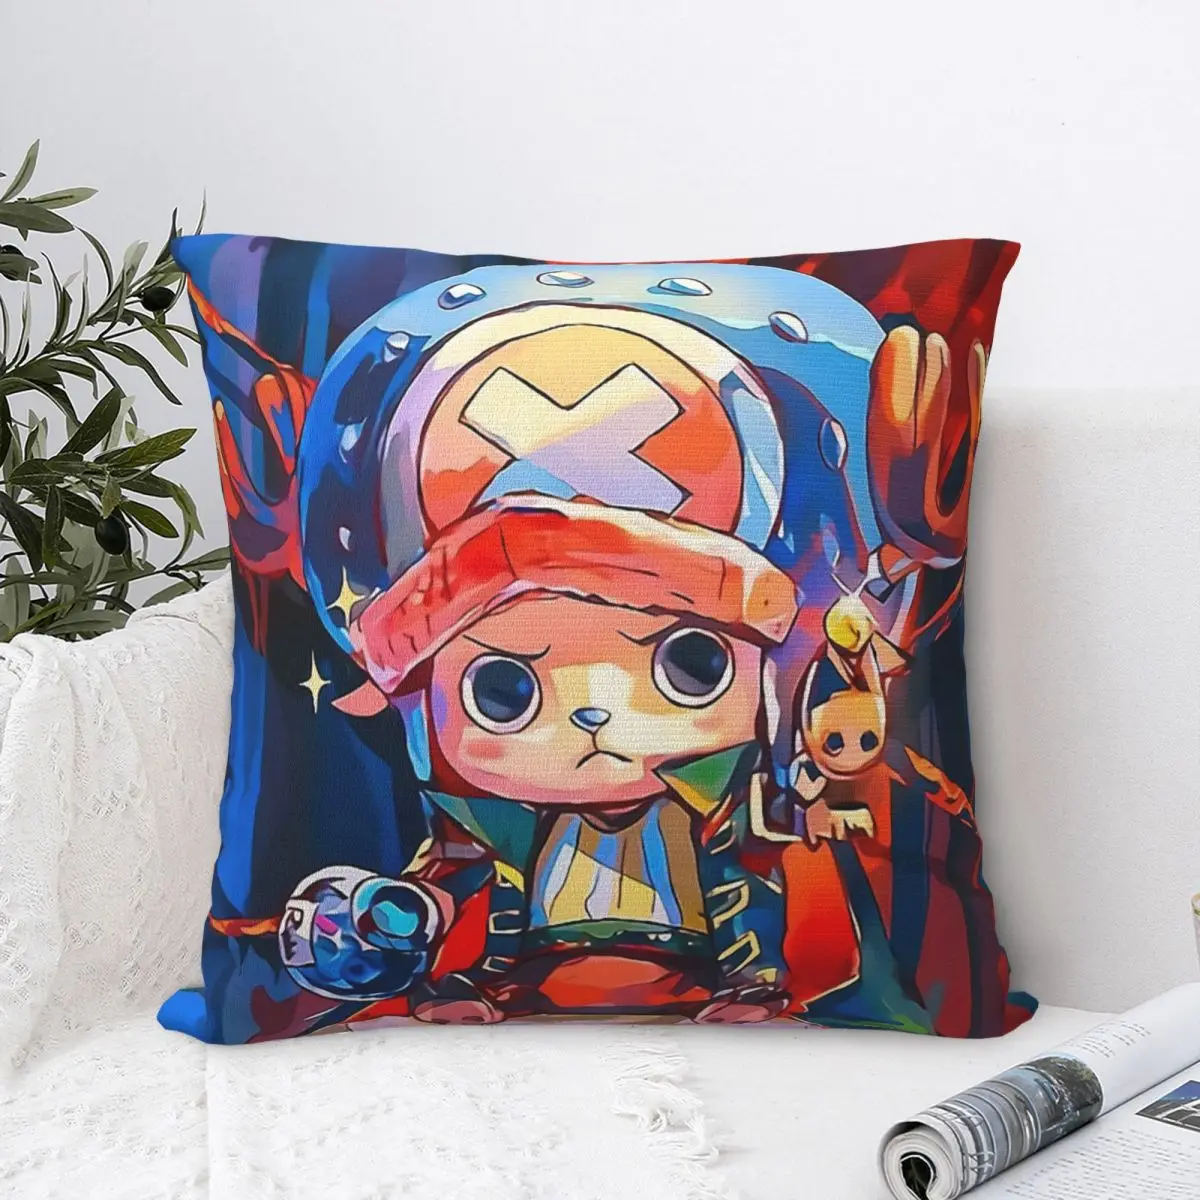 

Tony Tony Chopper Throw Pillow Case One Piece Nami Manga Backpack Coussin Case DIY Printed Breathable For Sofa Decor